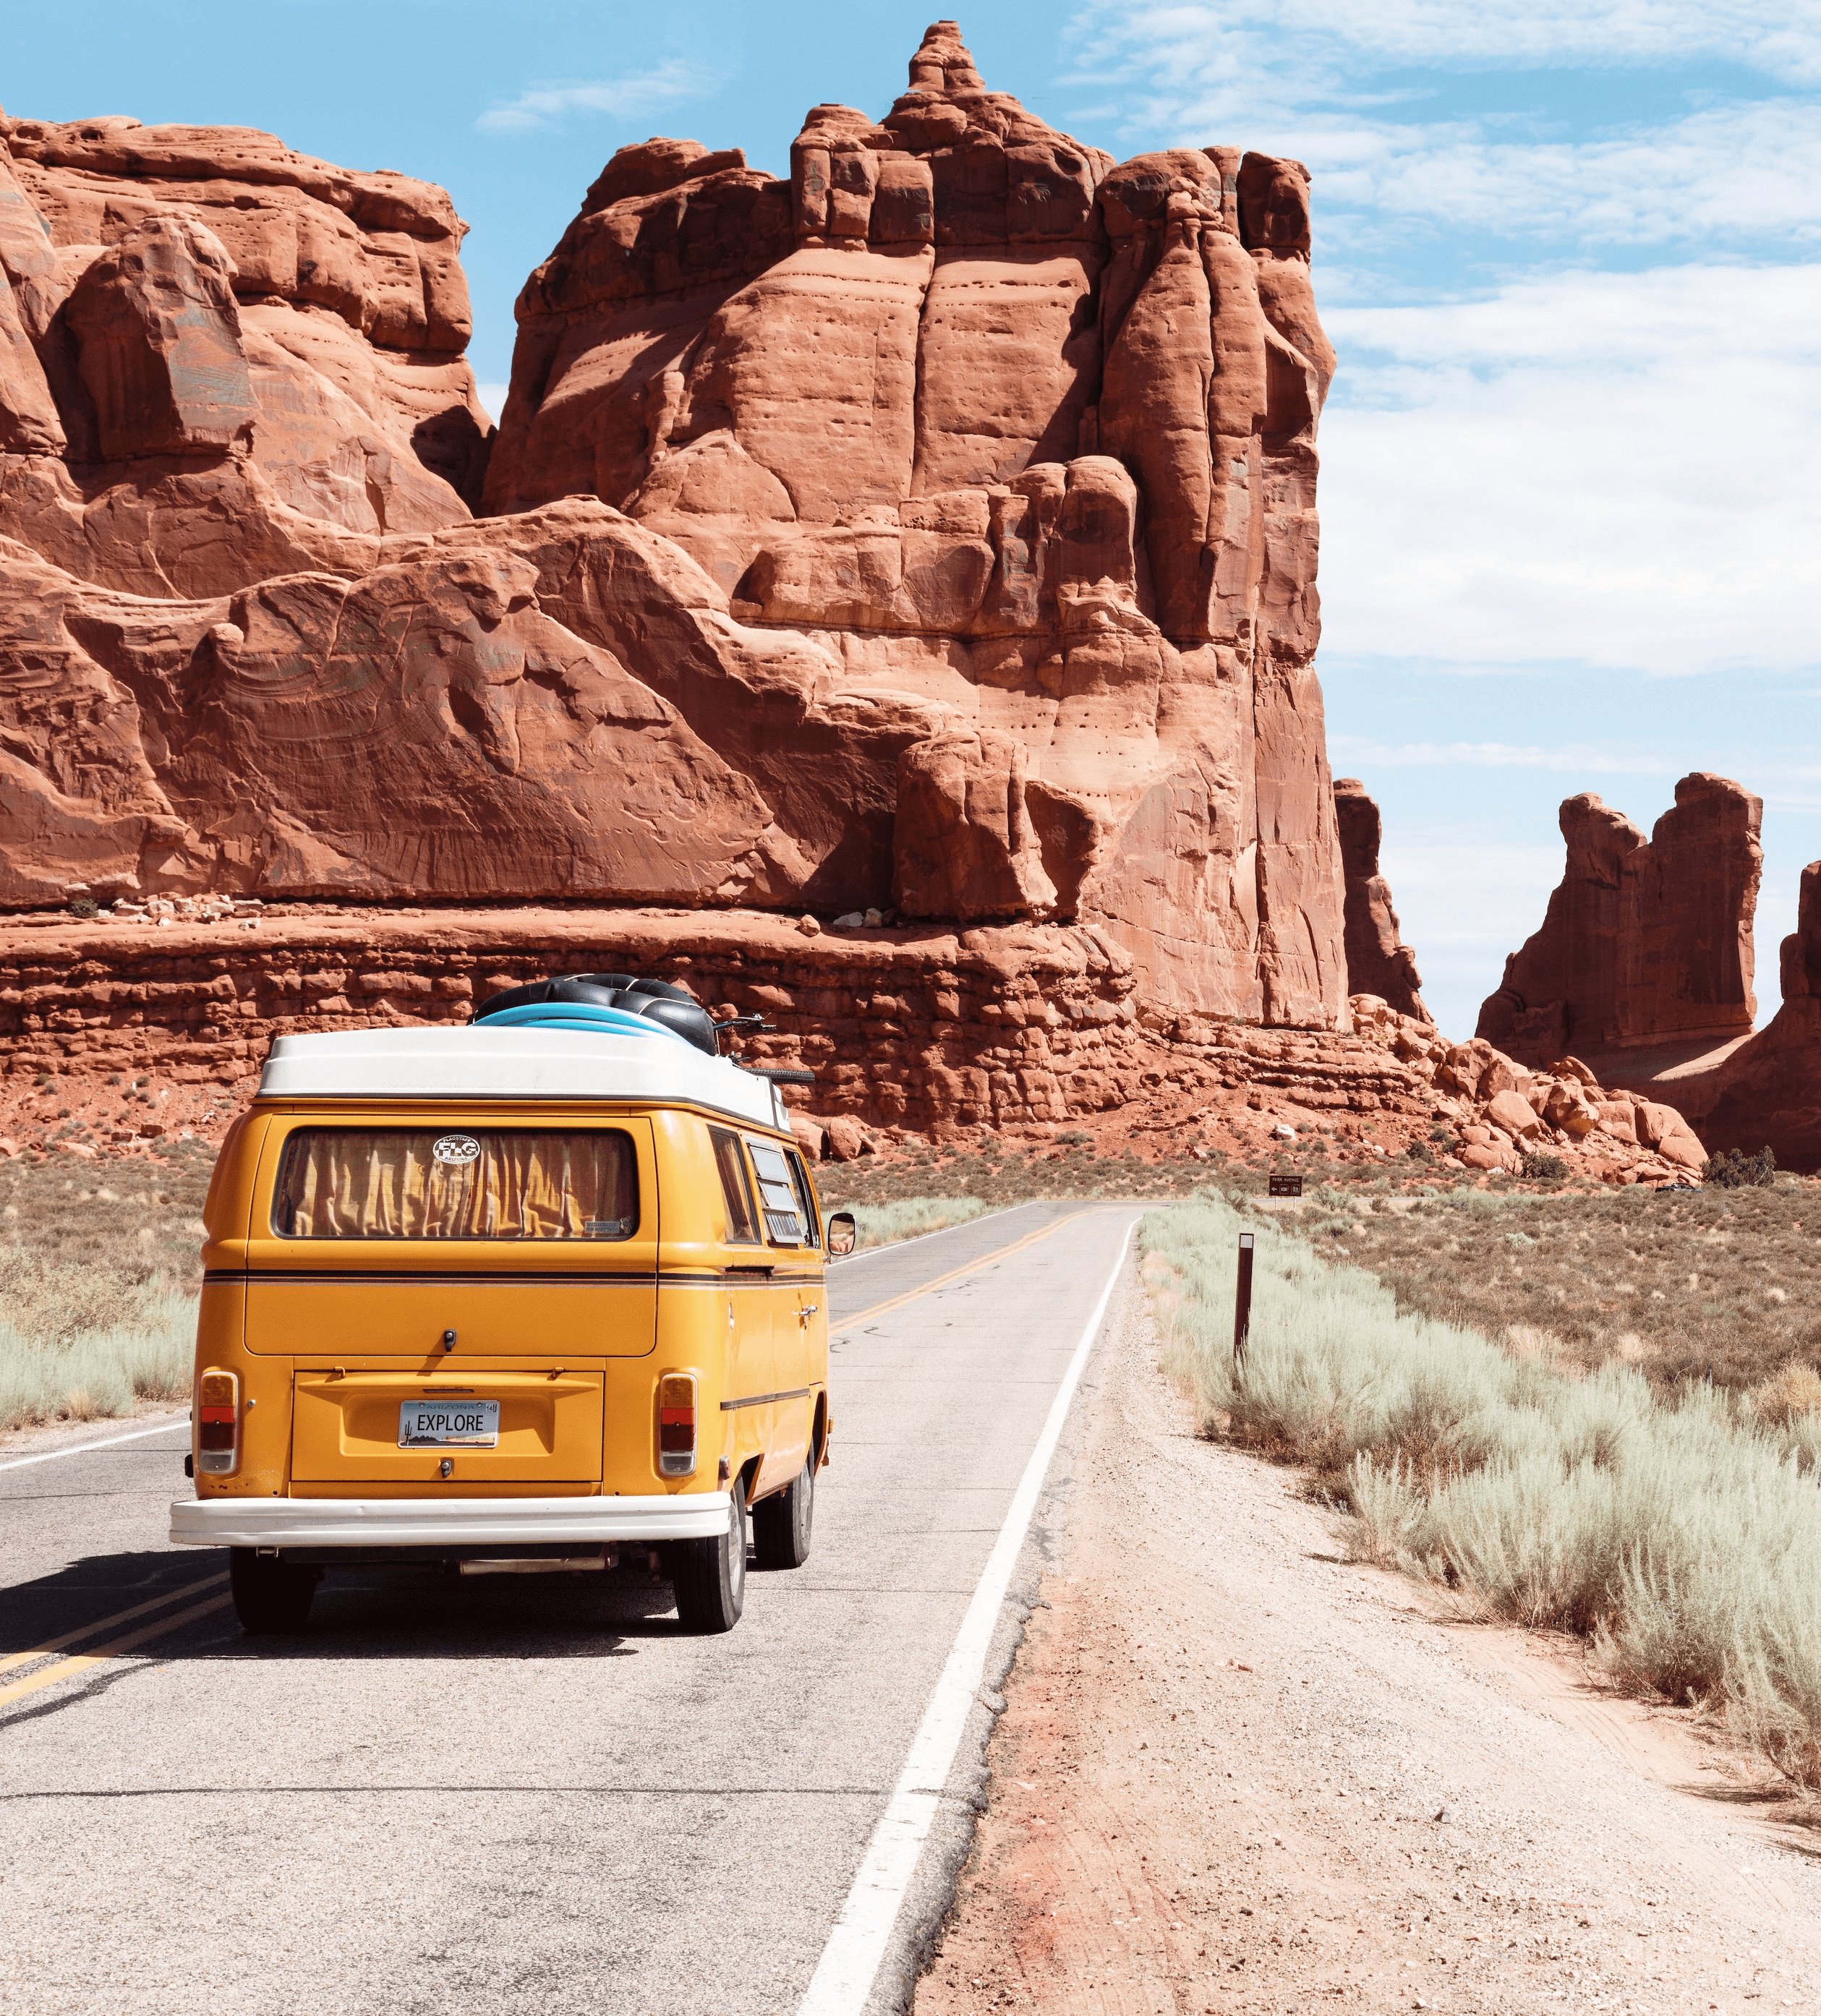 A yellow VW camper van in the desert with rock outcrops in the background.